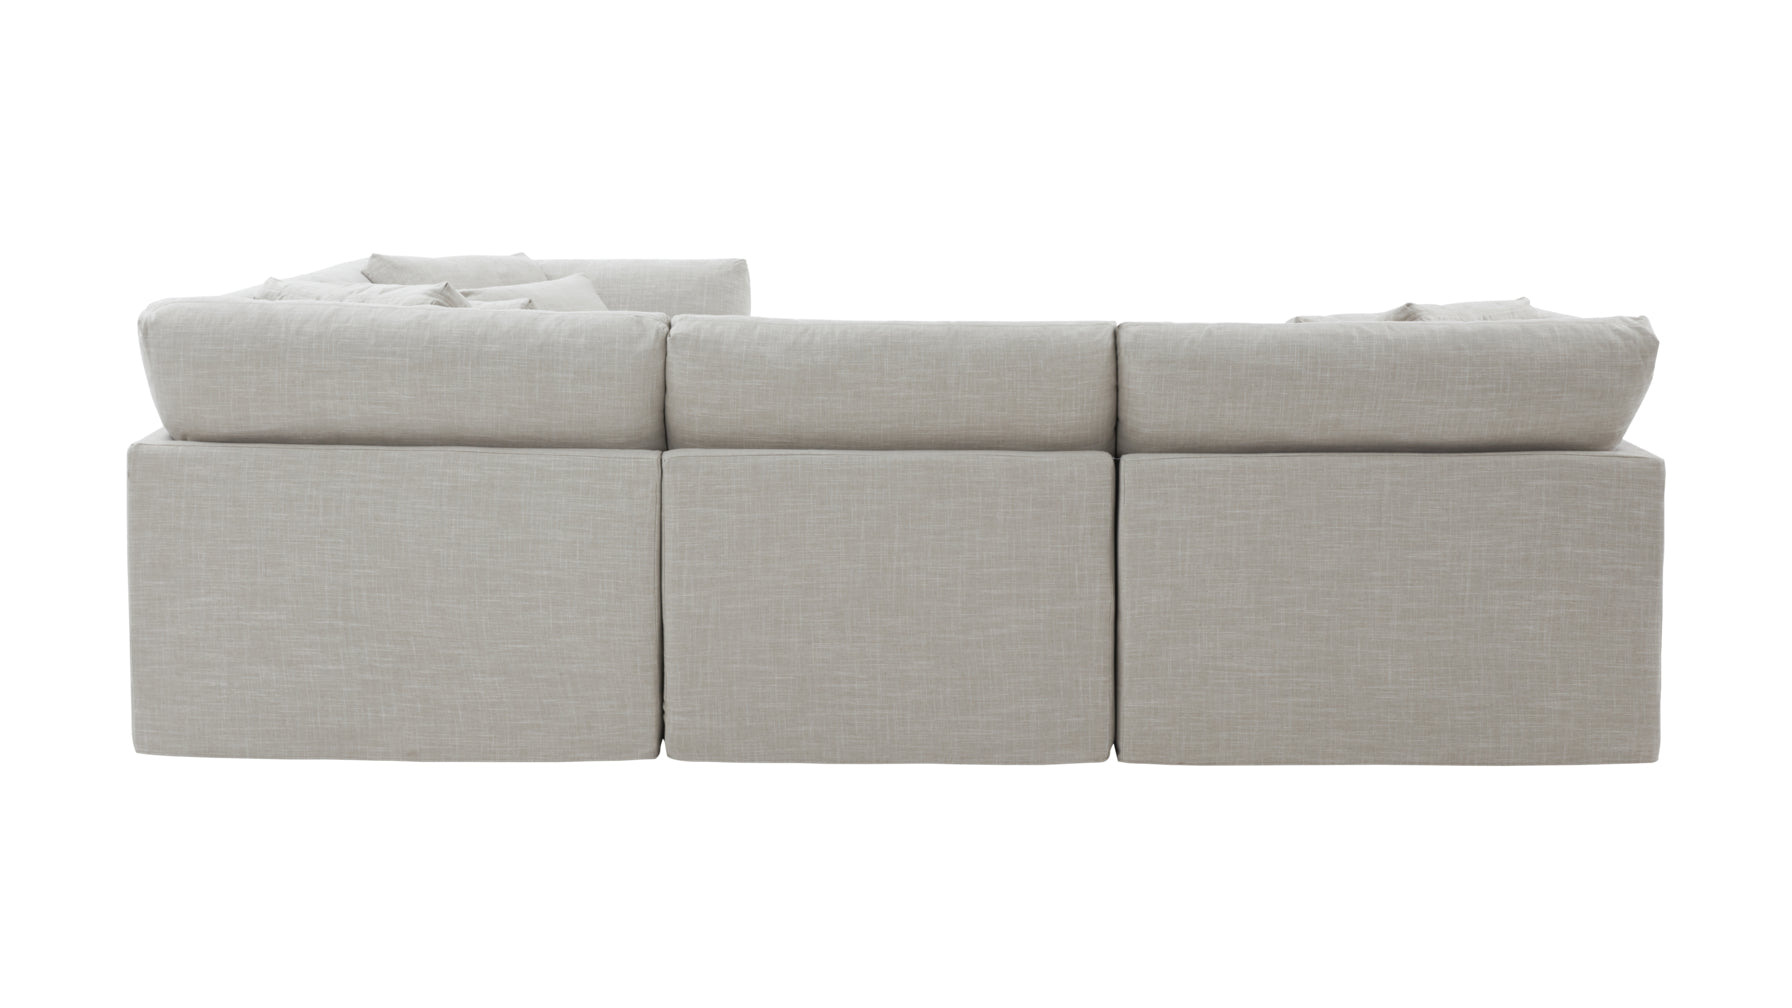 Get Together™ 4-Piece Modular Sectional Closed, Large, Light Pebble - Image 7